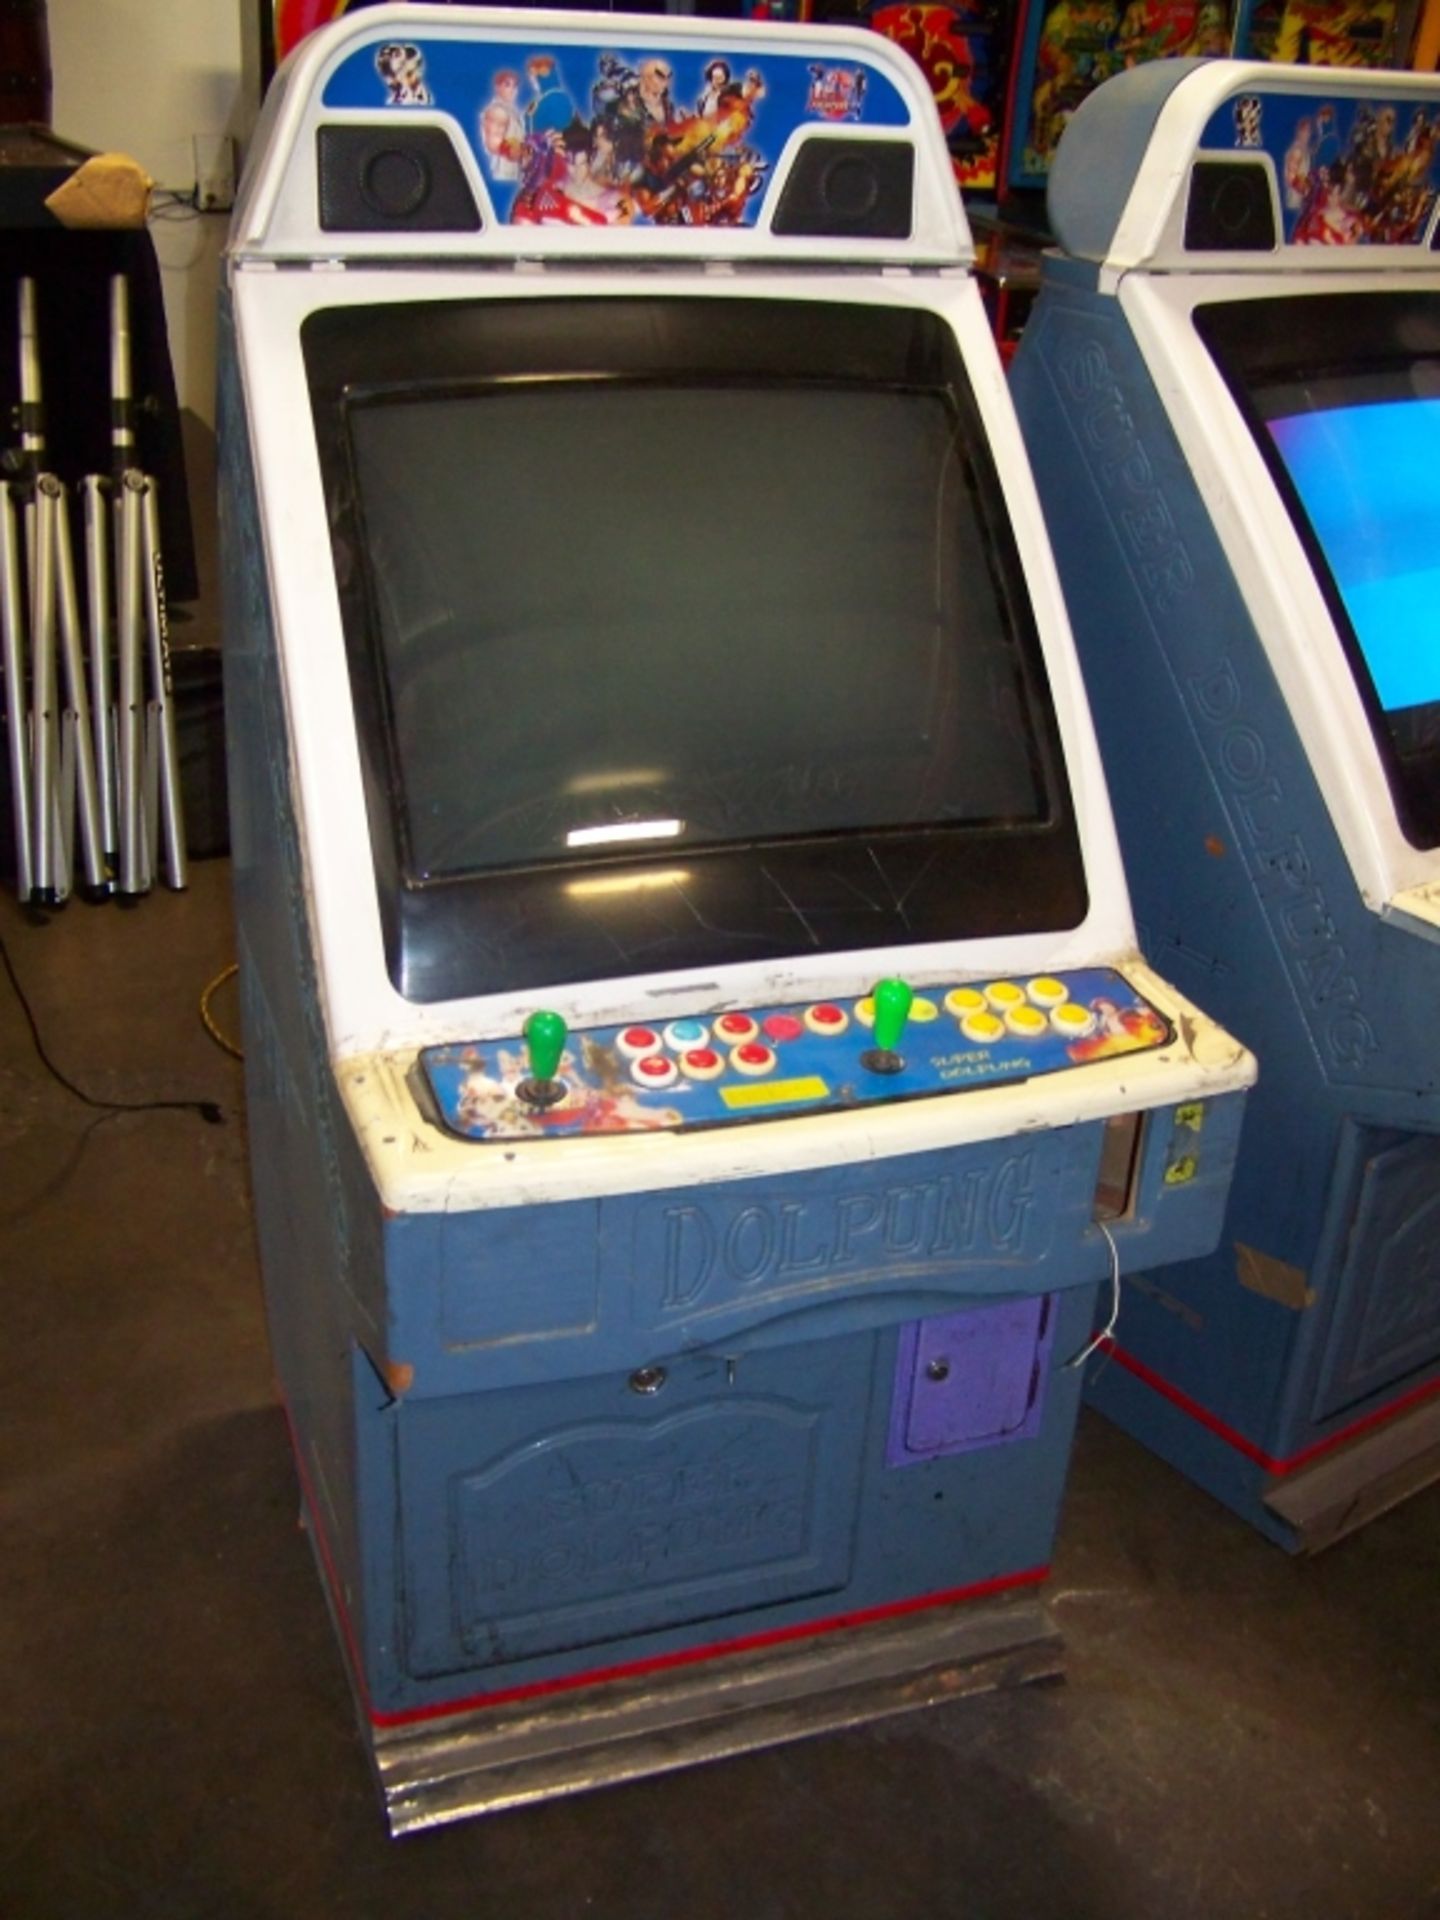 CANDY CABINET STREET FIGHTER 3 JAMMA ARCADE Item is in used condition. Evidence of wear and - Image 2 of 3